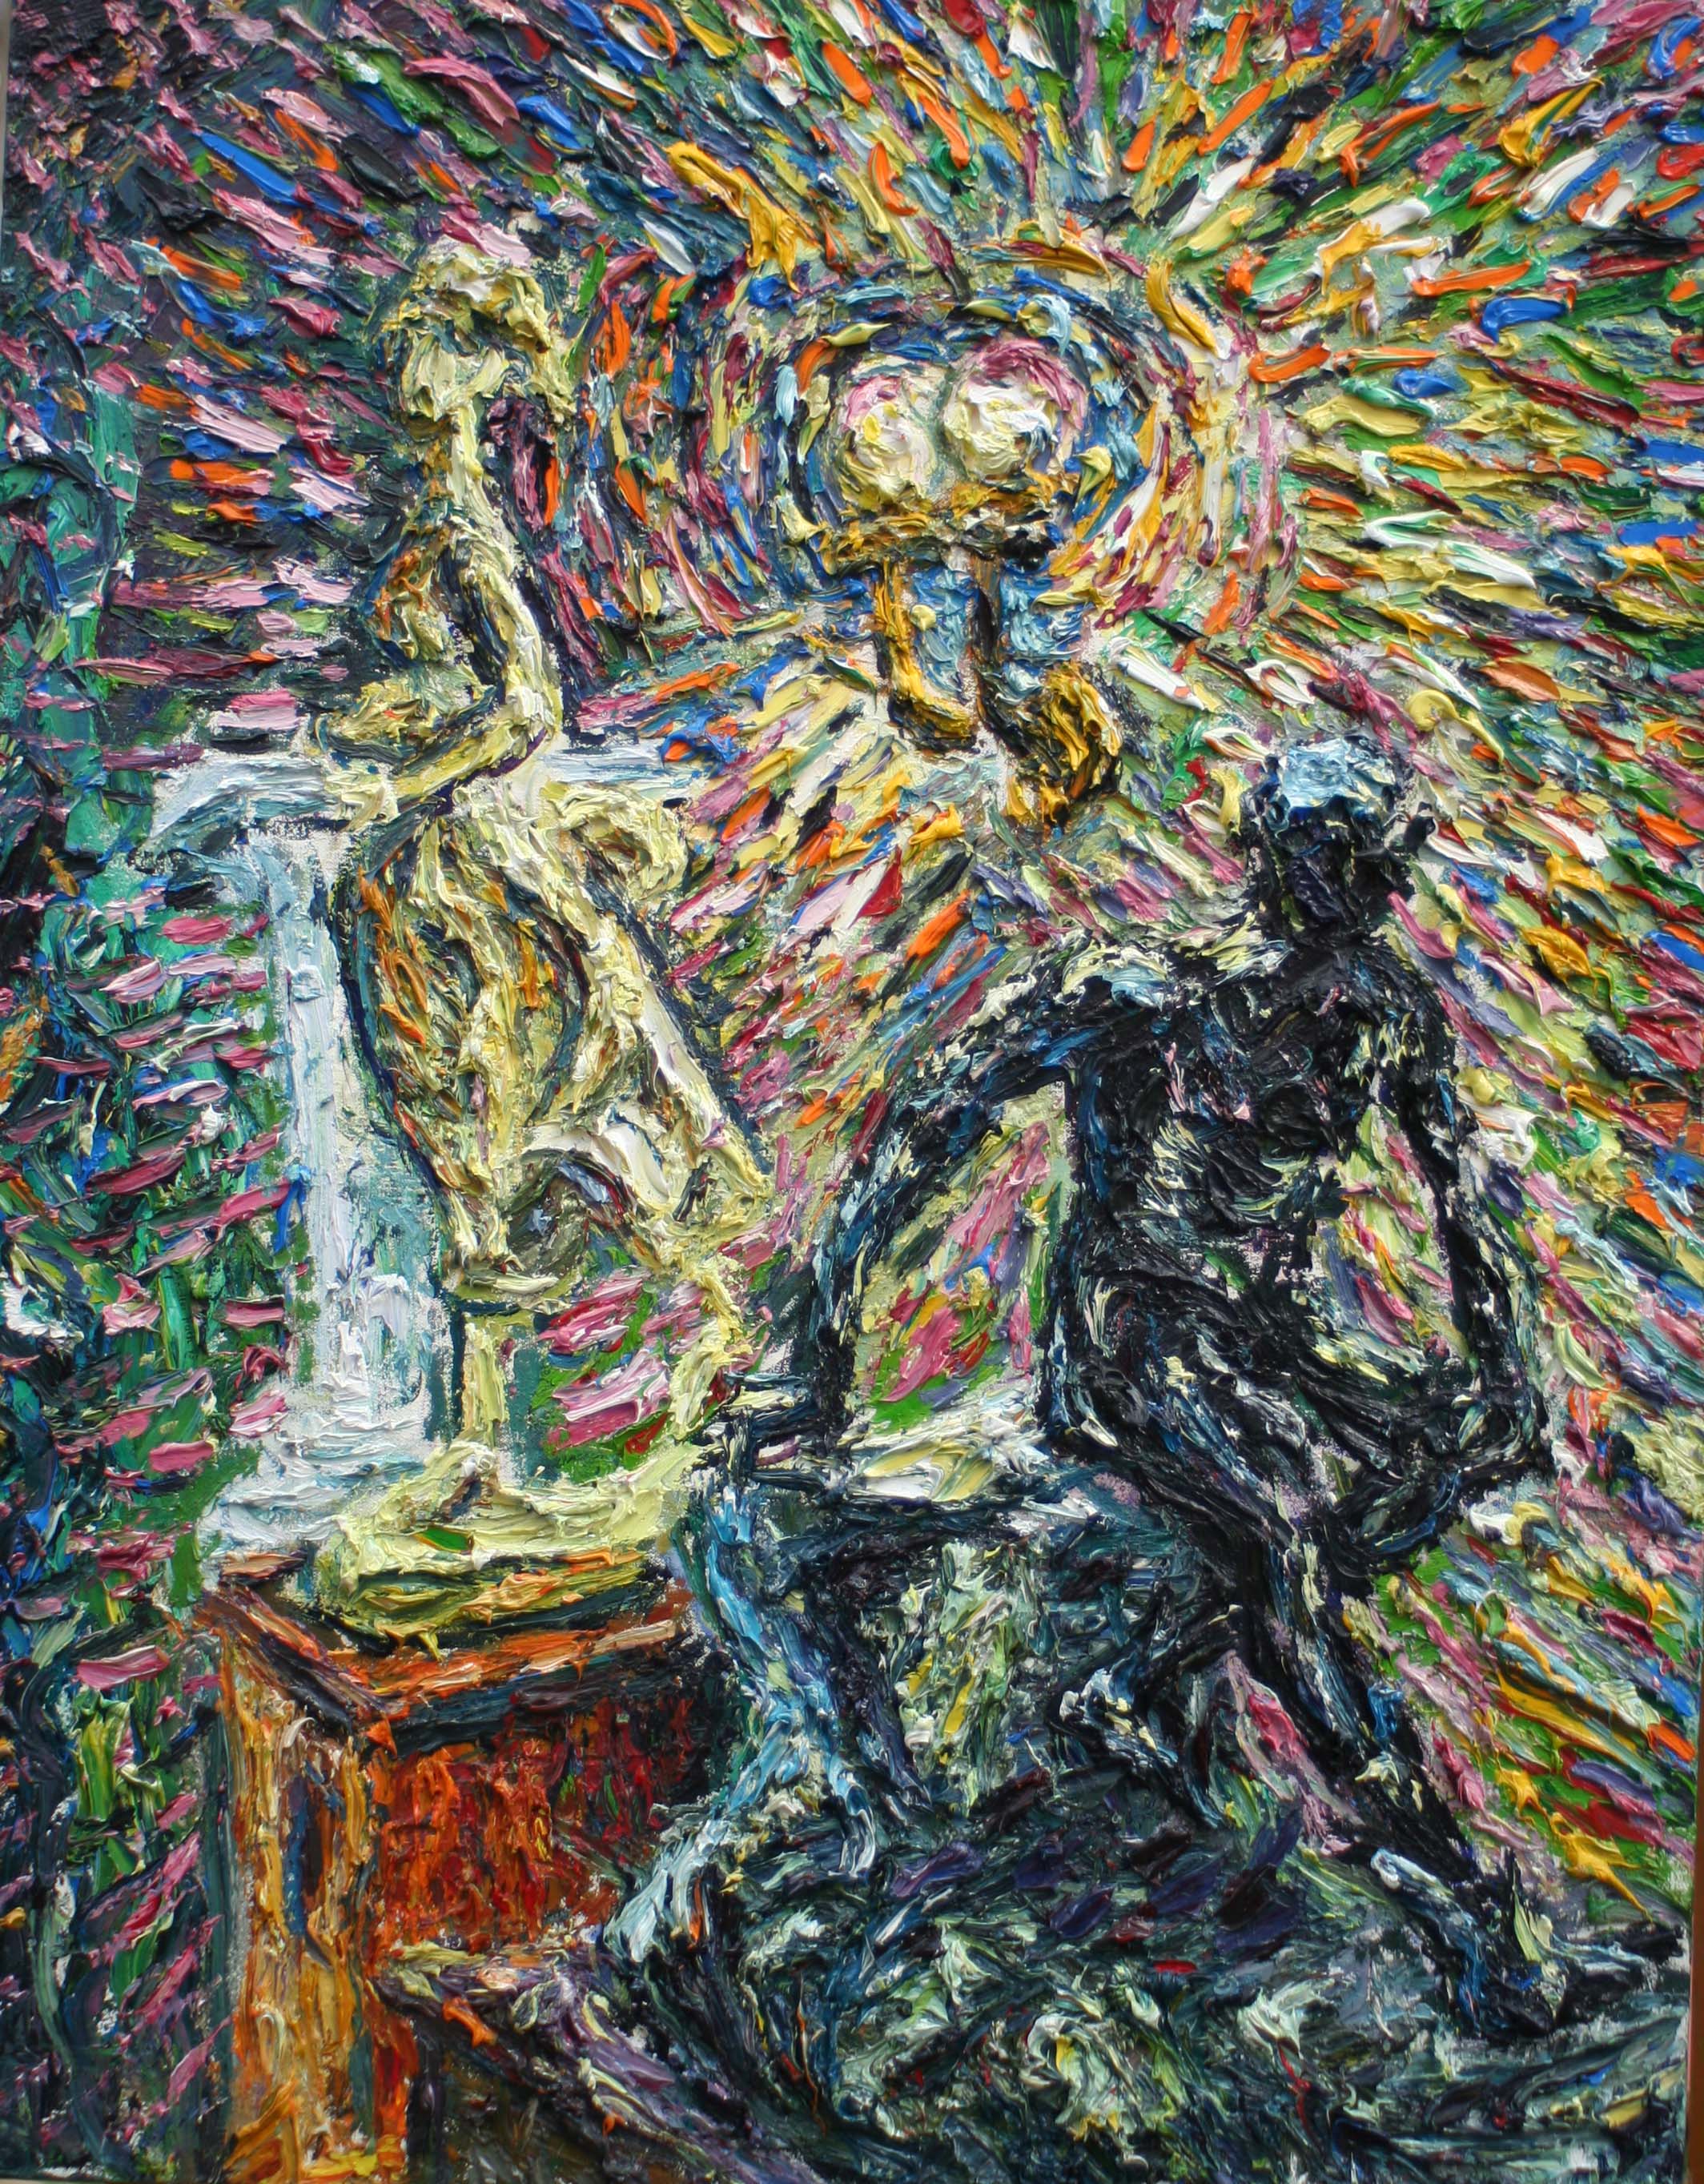 Statues in Hallway 28"x22" oil on canvas  1993